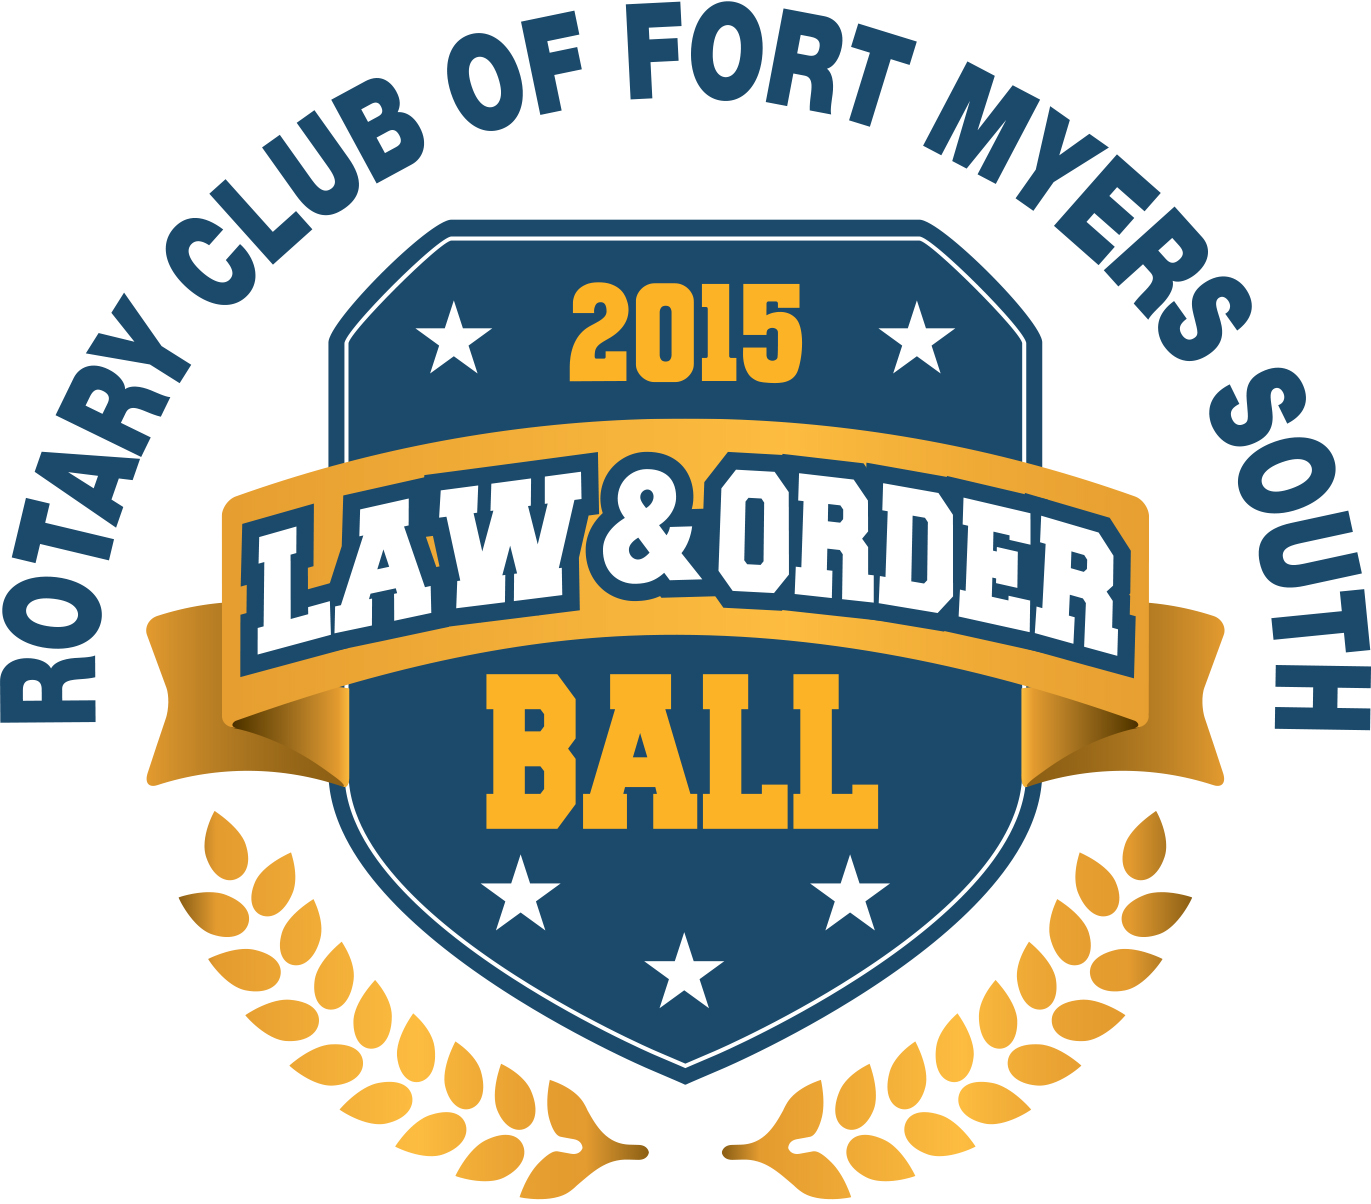 Law Enforcement Heroes Nominated for Law and Order Ball Officer of the Year